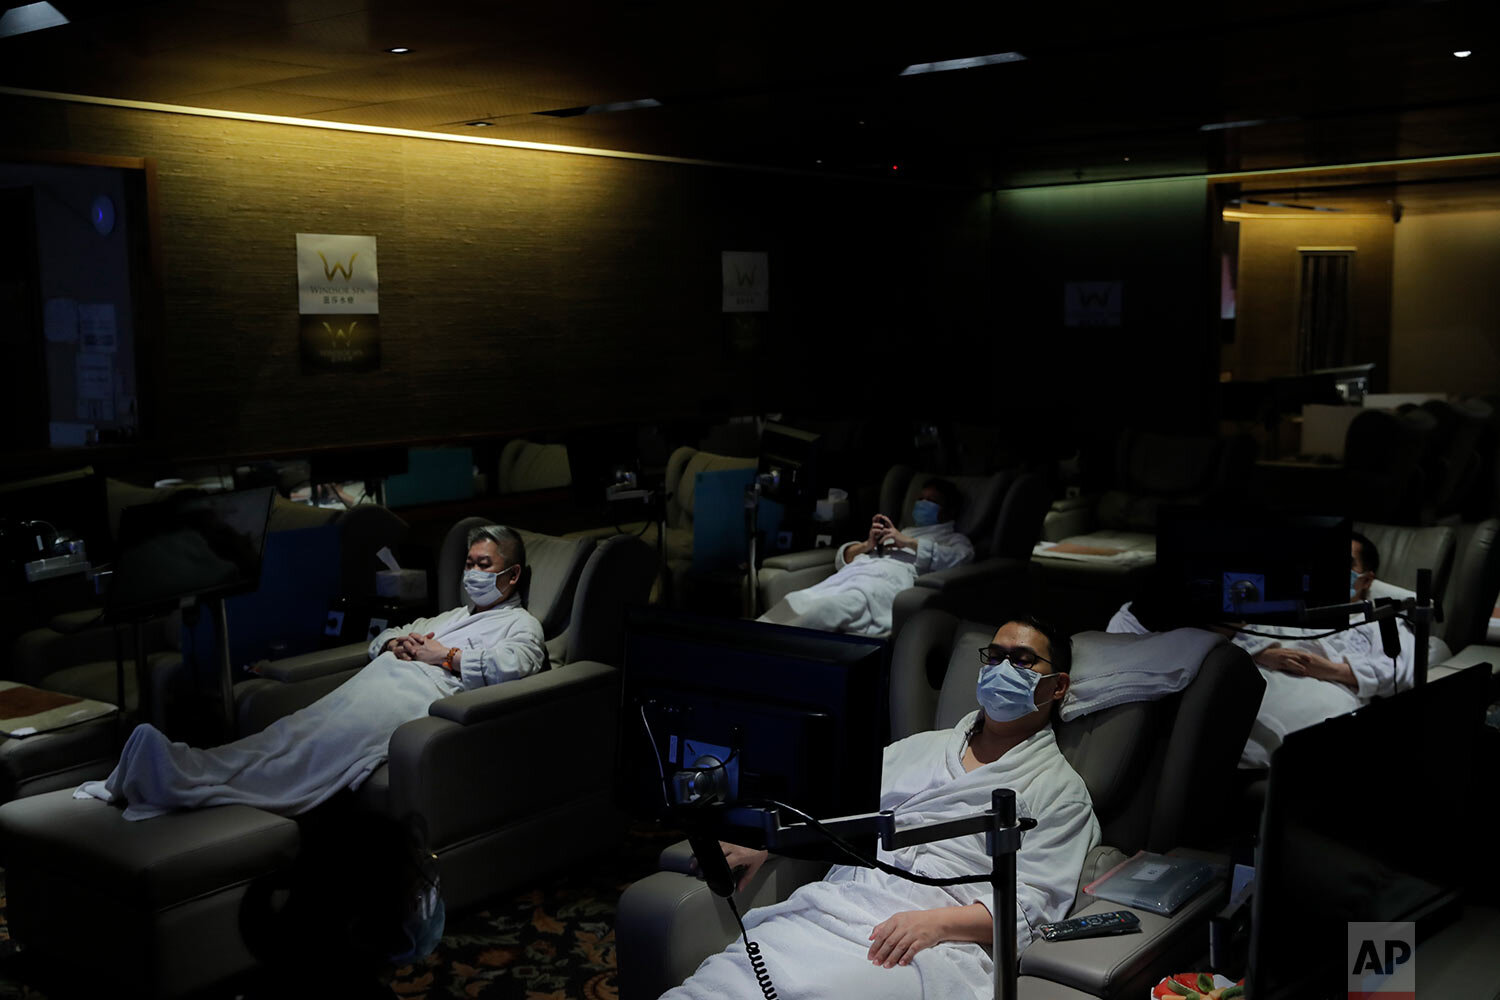  Staff members wearing face masks demonstrate the safety measures to media as the massage spa plans to reopened in Hong Kong, Thursday, Sept. 17, 2020.  (AP Photo/Kin Cheung) 